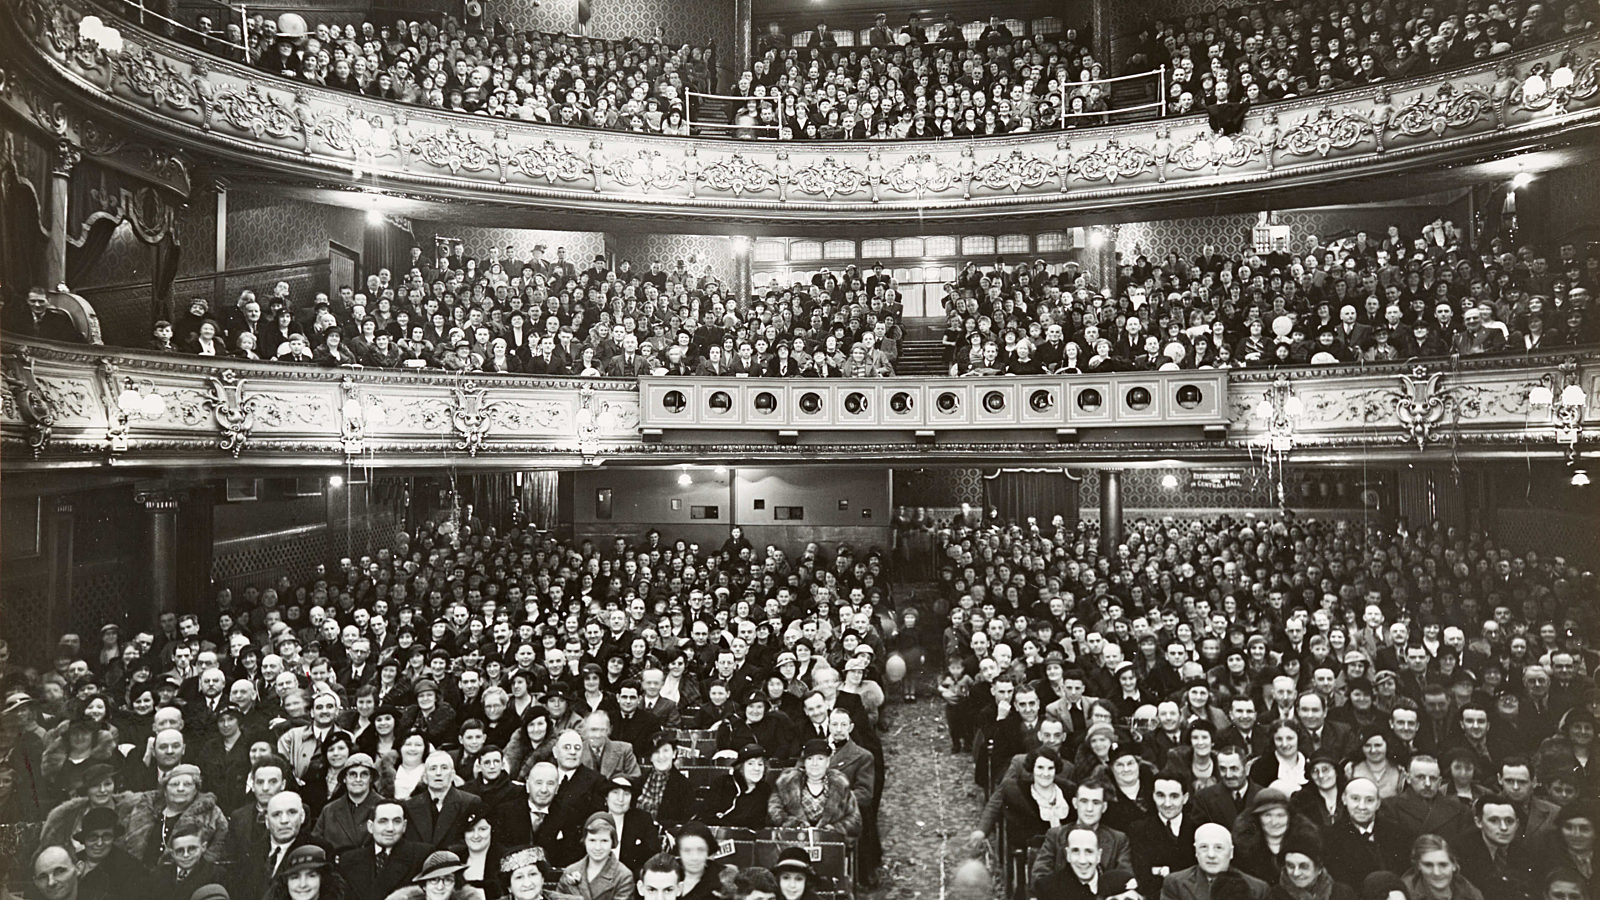 A black and white photo of a crowded theatre audience, taken from the stage